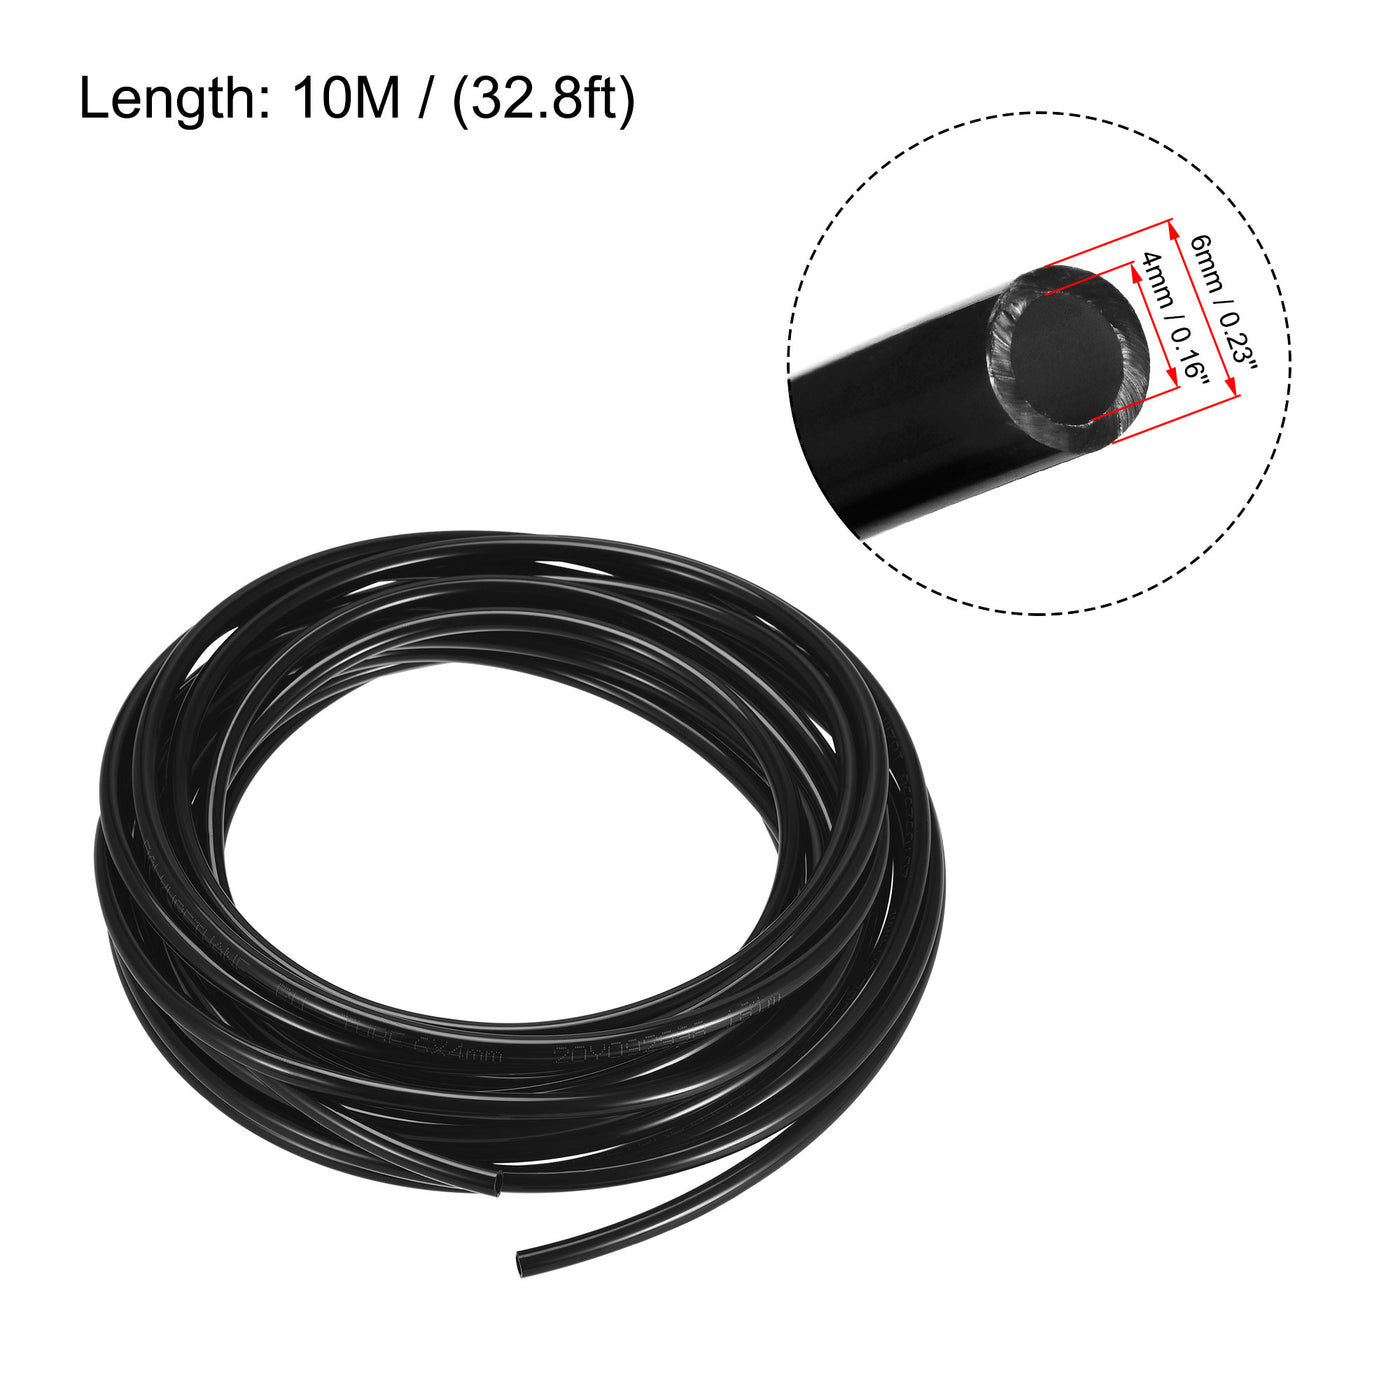 uxcell Uxcell Pneumatic Air Hose Tubing Air Compressor Tube 4mm/0.16''ID x 6mm/0.23''OD x 10m/32.8Ft Polyurethane Pipe Black with Connect Fitting Kit